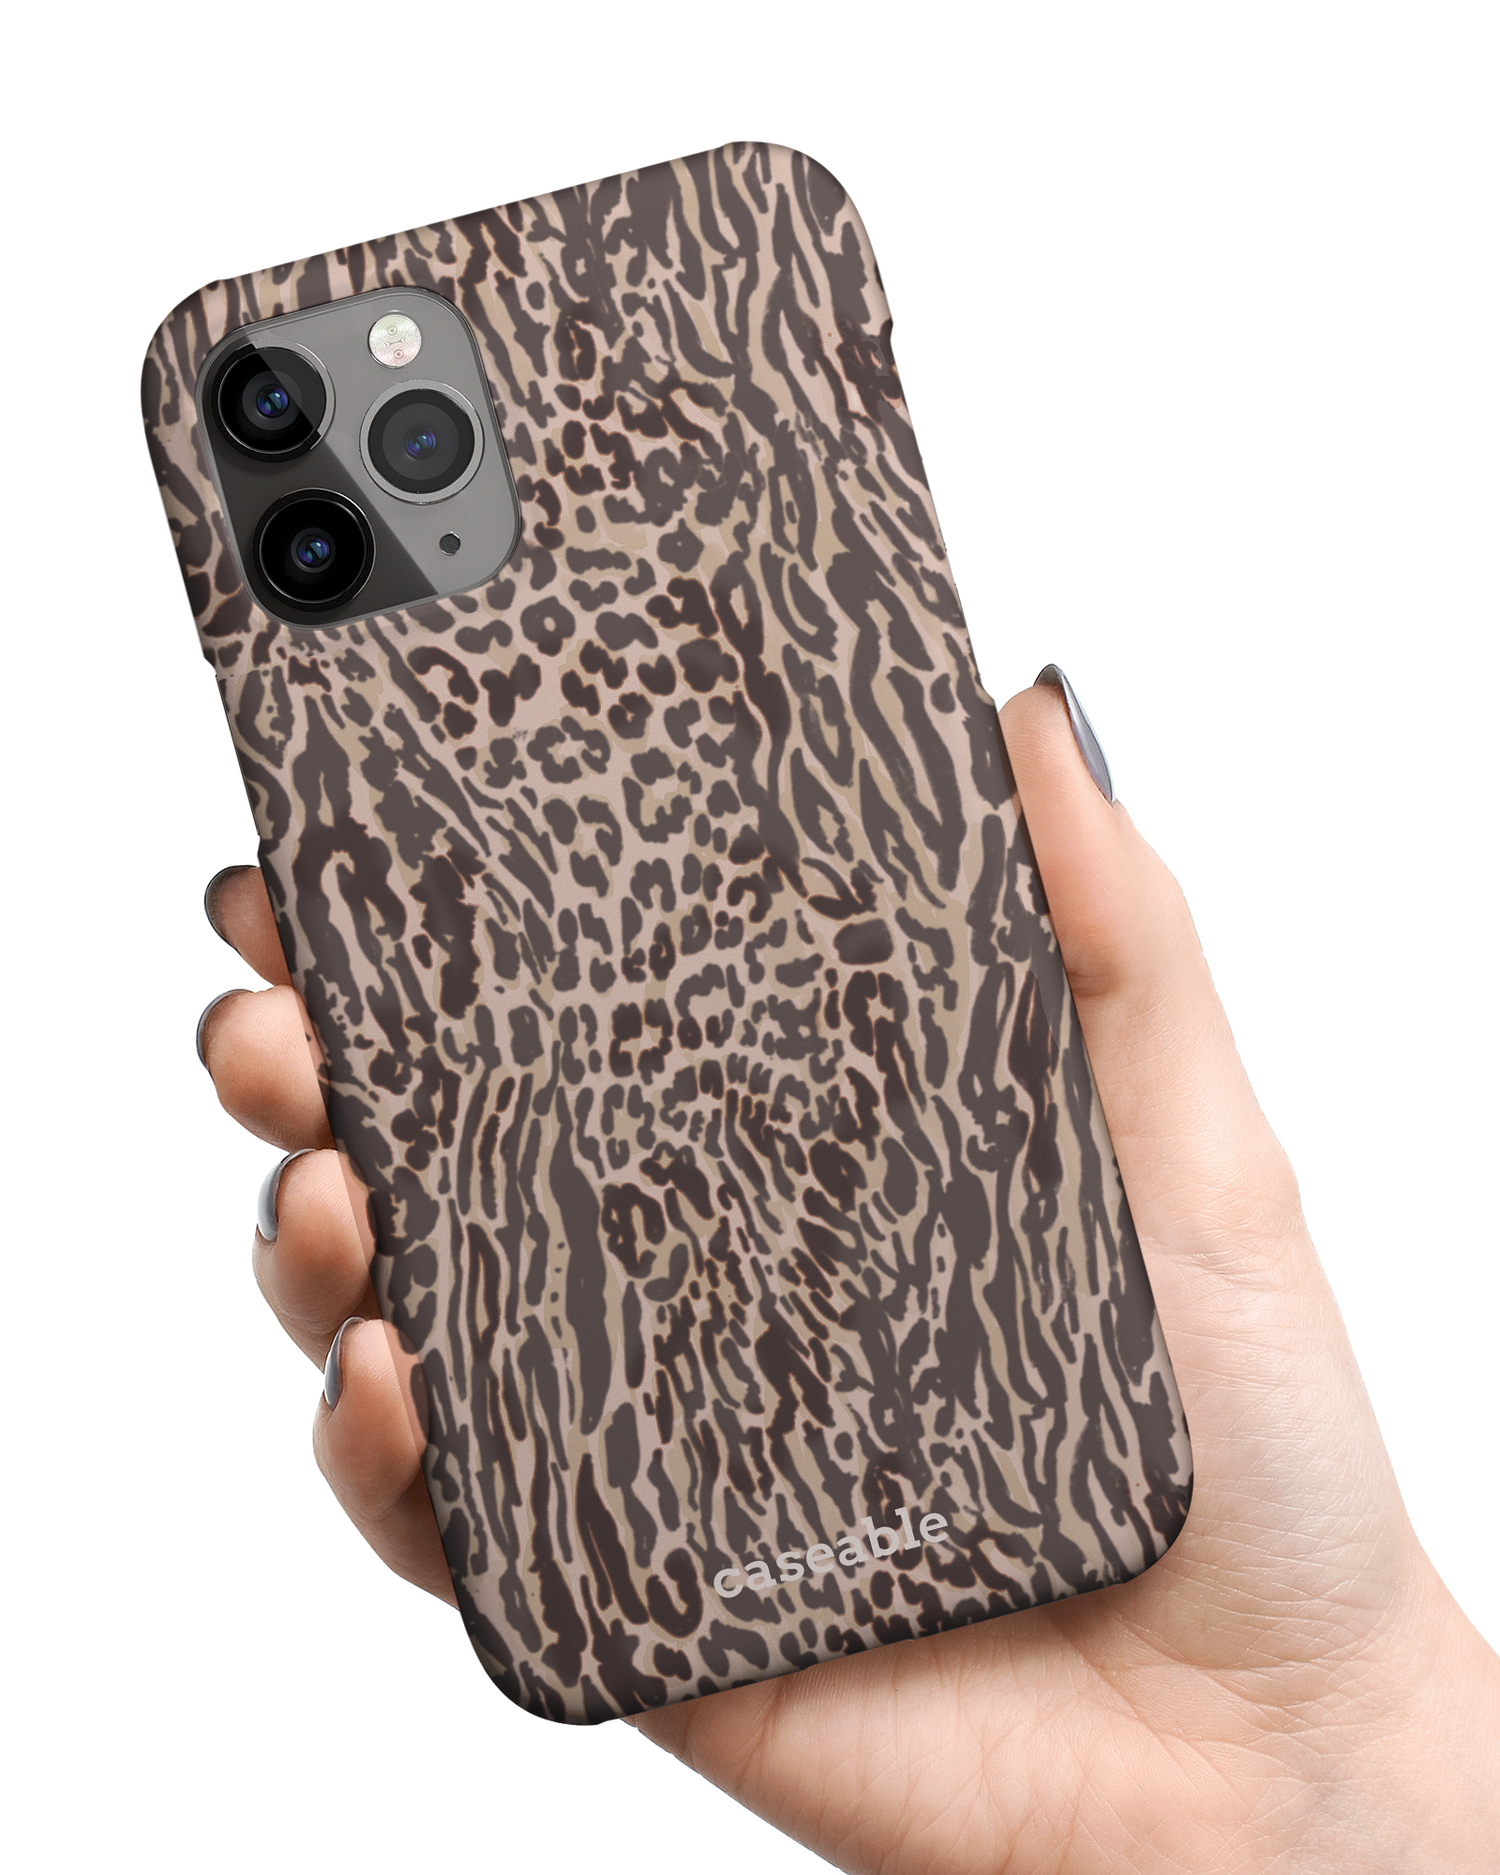 Animal Skin Tough Love Hard Shell Phone Case Apple iPhone 11 Pro Max held in hand